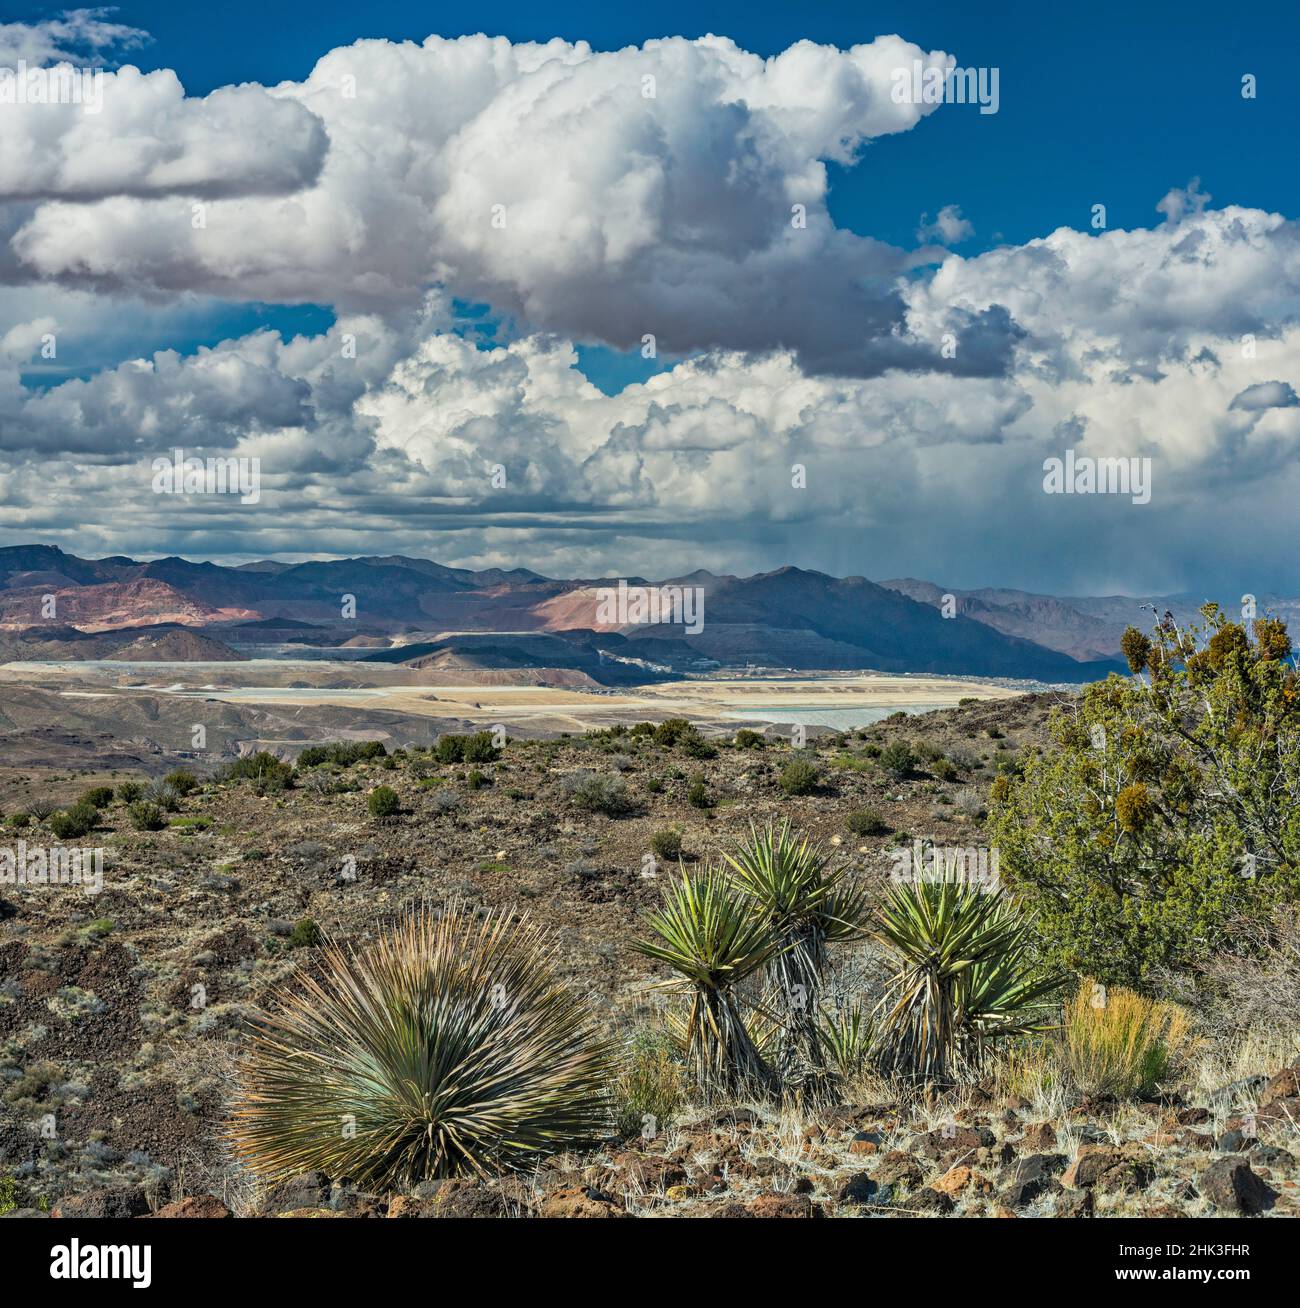 Towering cumulus clouds, rain over Morenci copper mine in far dist 12 m N, White Mountains behind, sotol, yucca, view from Black Hills, Arizona, USA Stock Photo